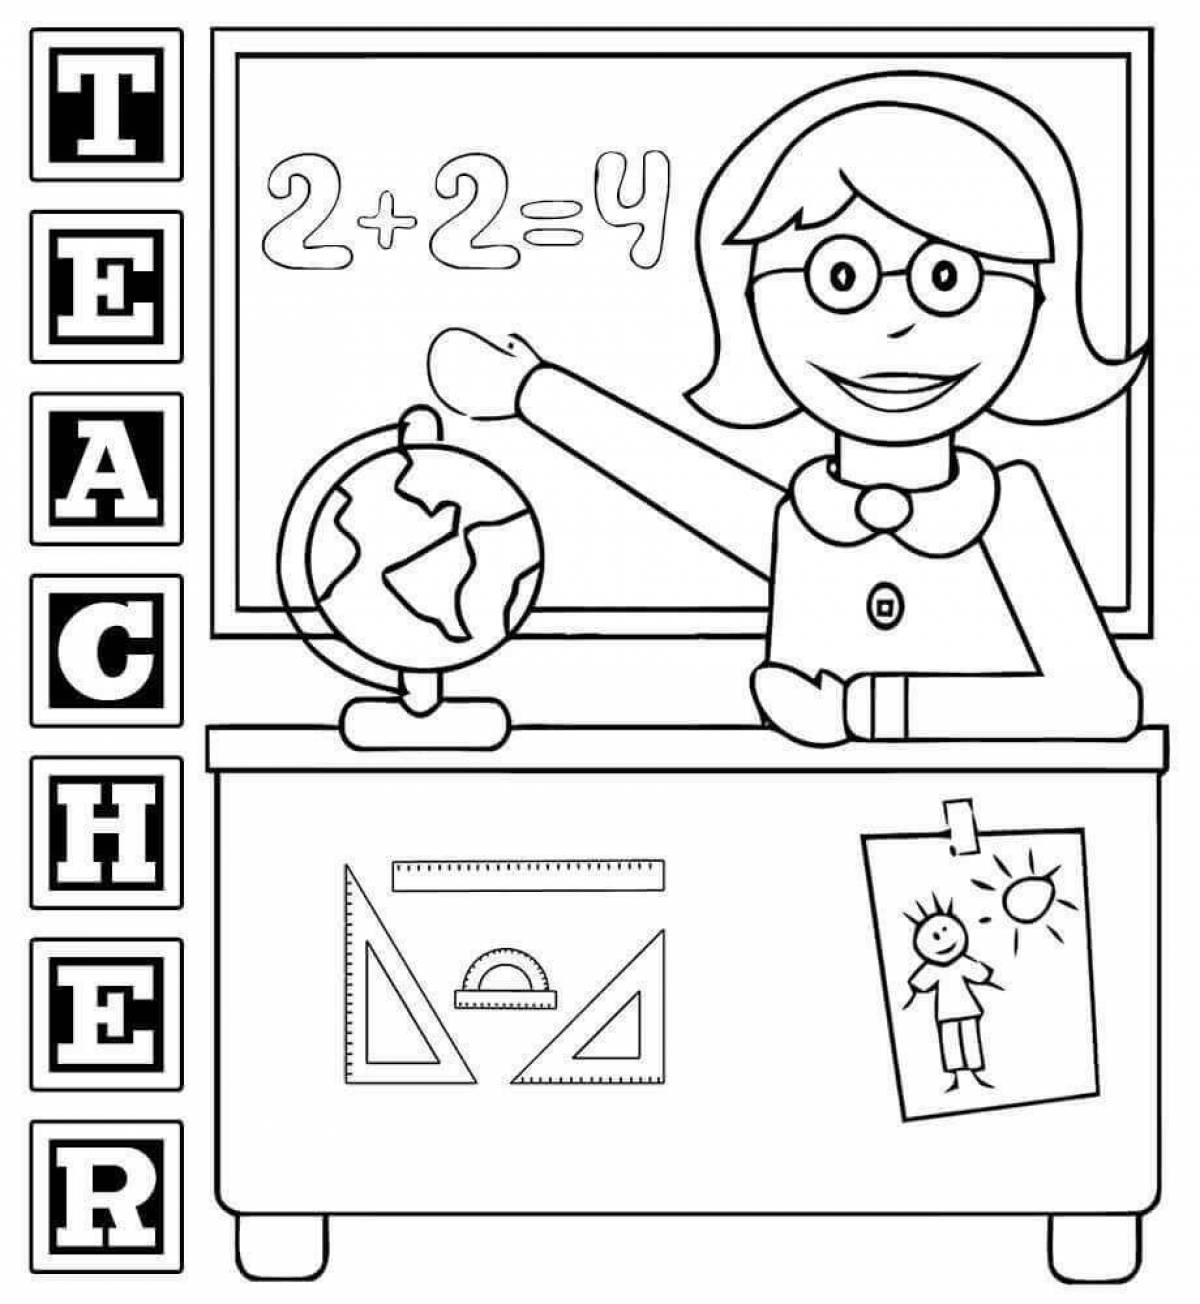 Teacher's bright coloring book for younger students